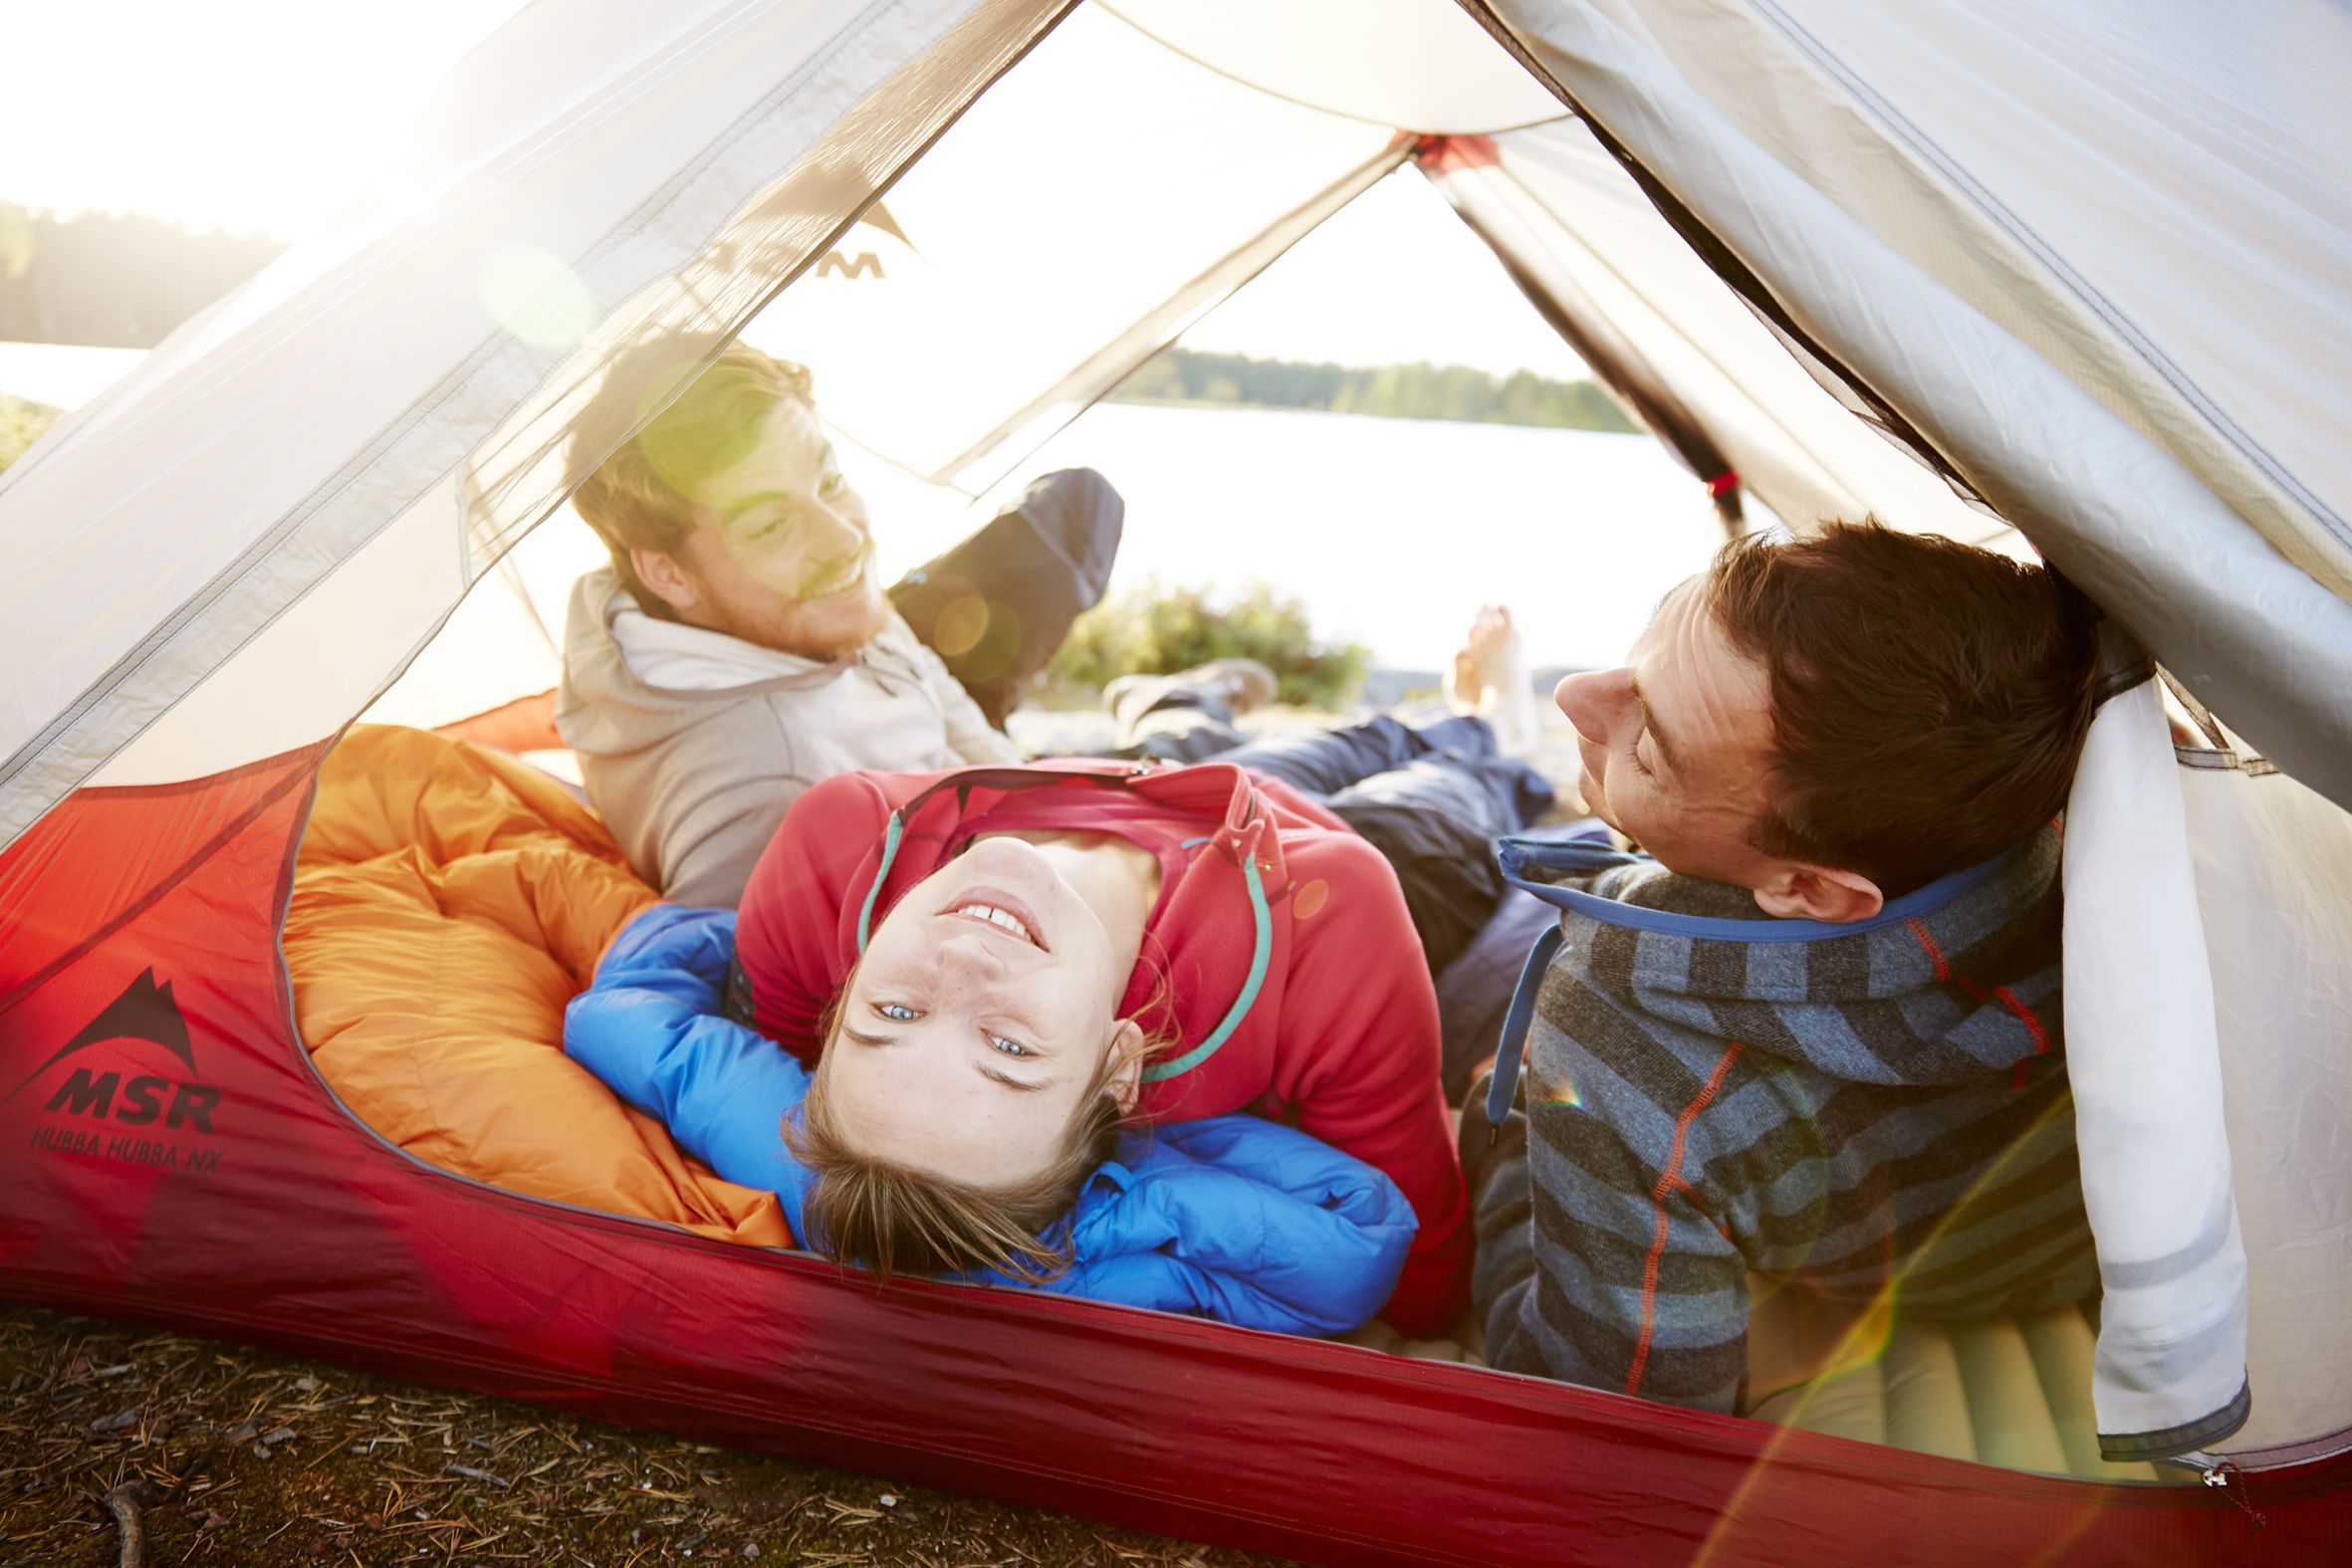 Group of friends lying in a tent laughing and looking up at the viewer. In the background is the lake district of Oslo, Norway